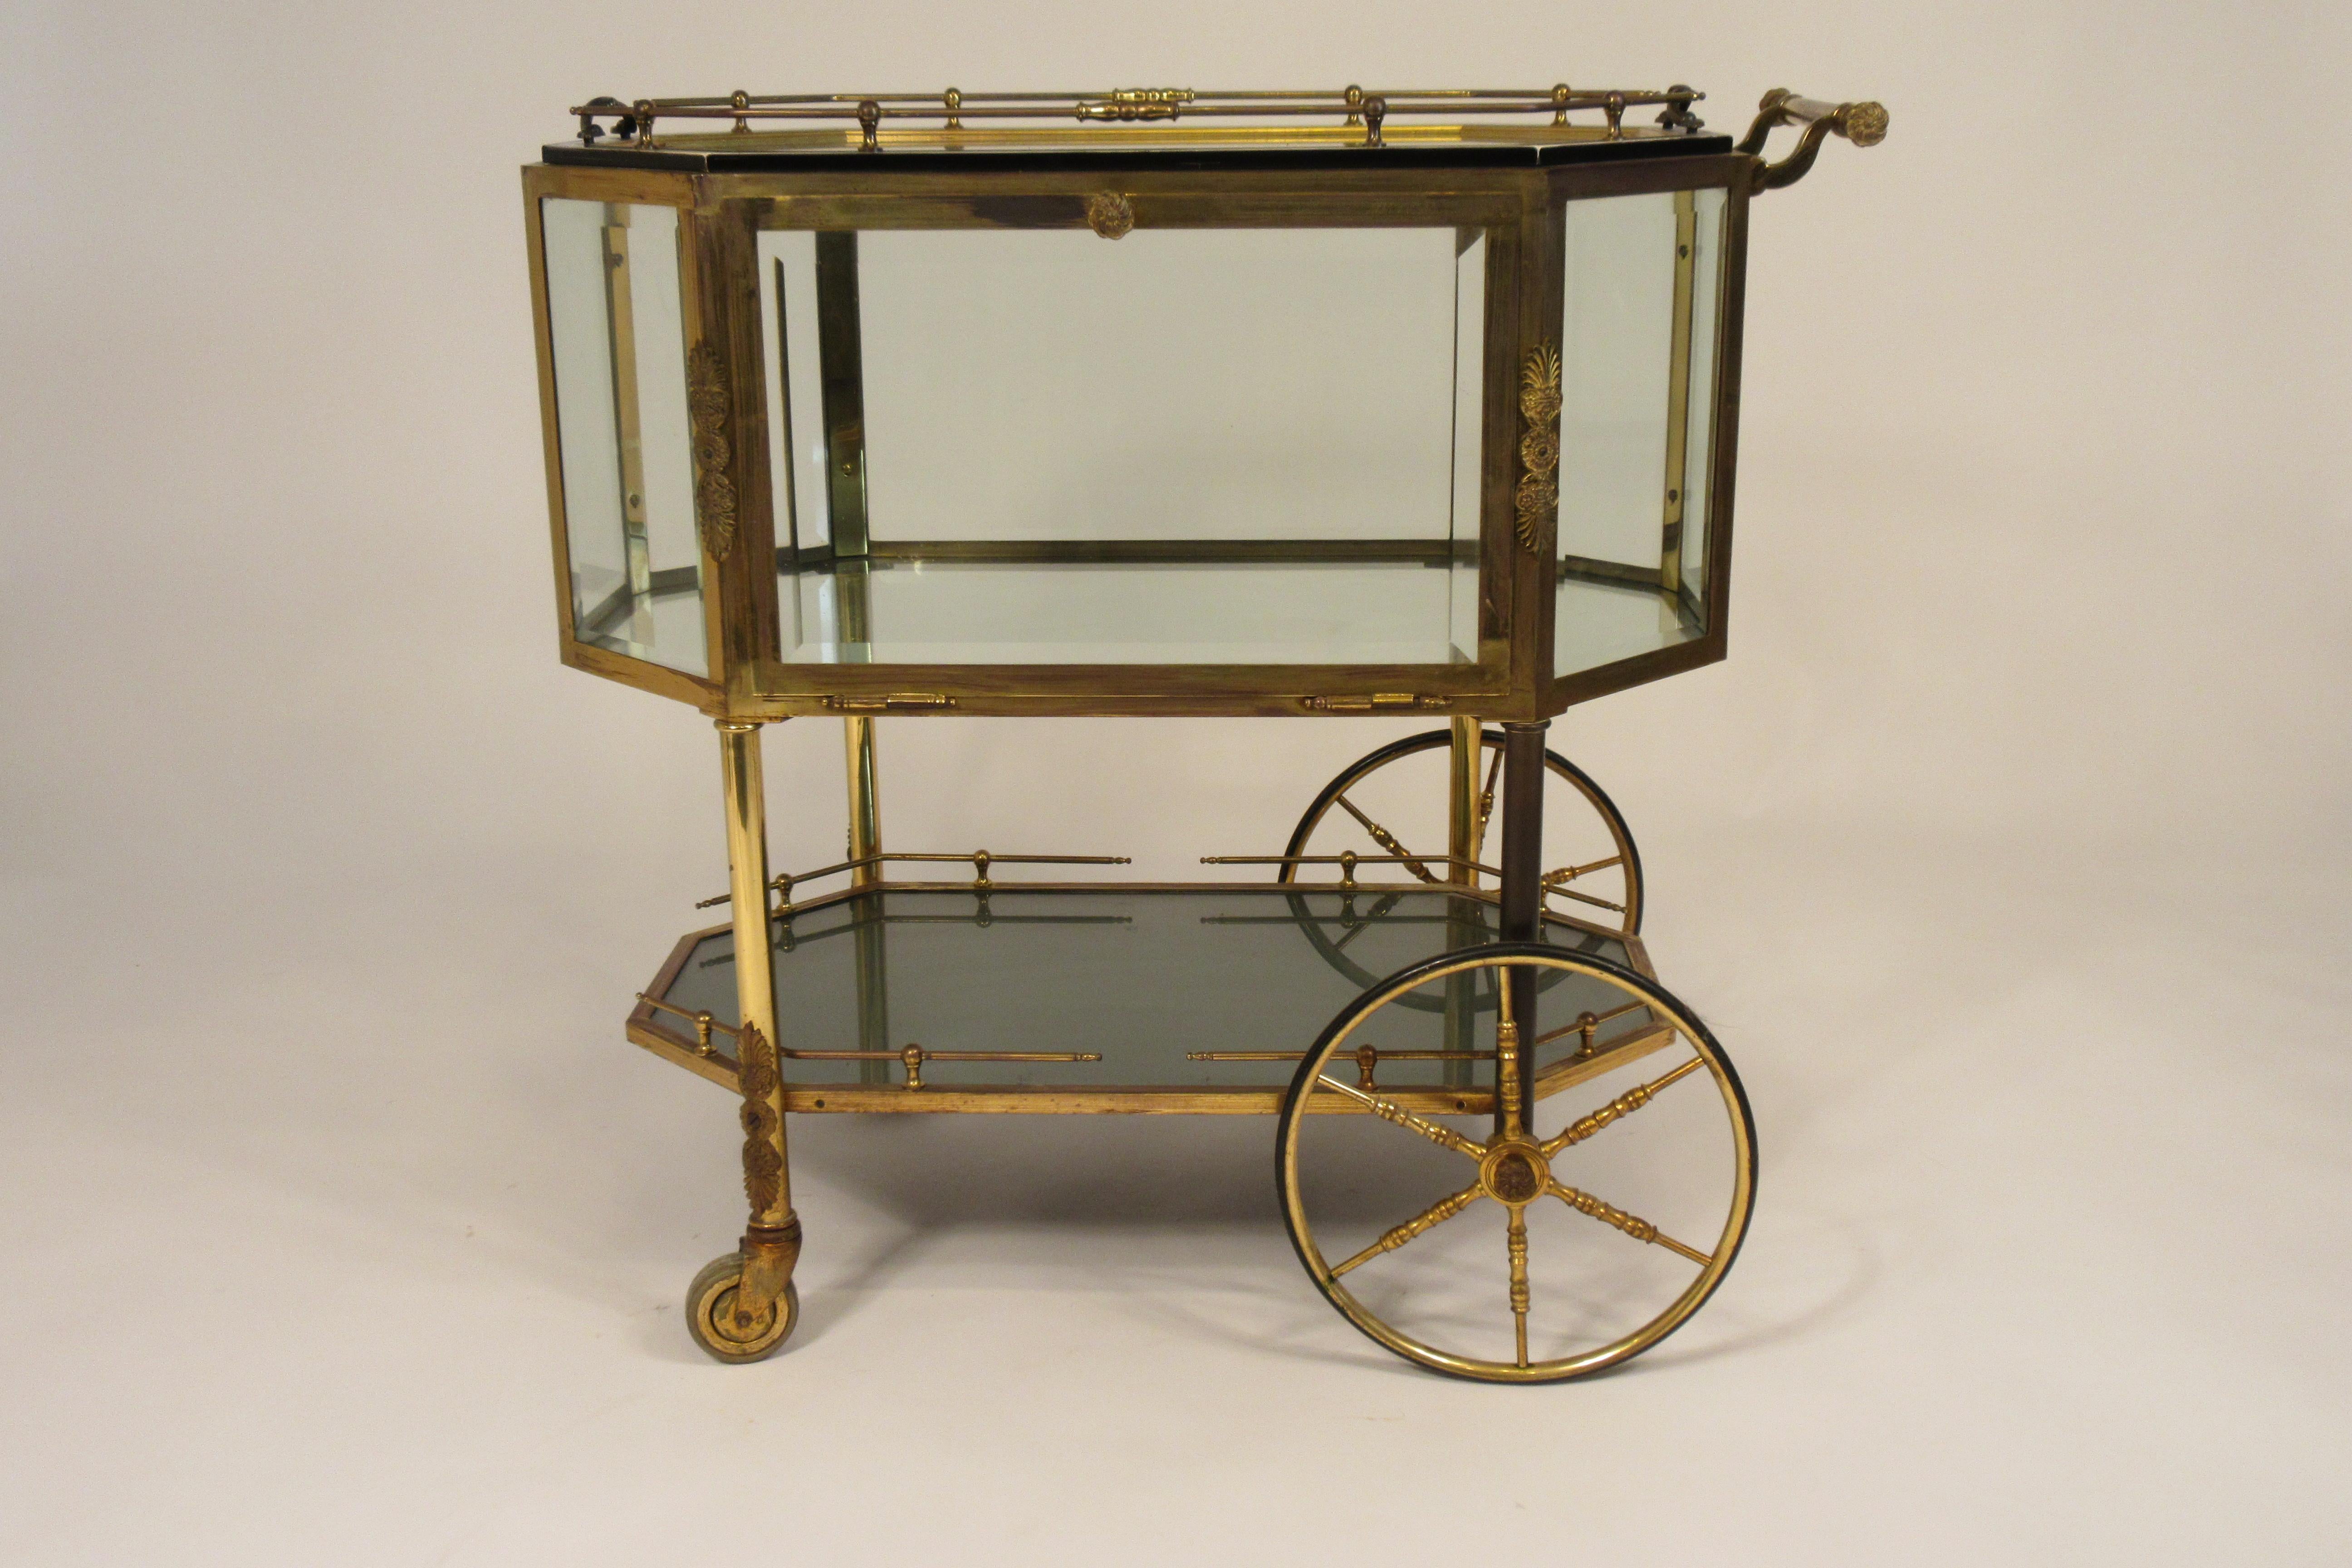 1940s French pastry / bar cart. Brass and beveled glass. Glass door opens to allow access. Out of a NYC penthouse apartment.